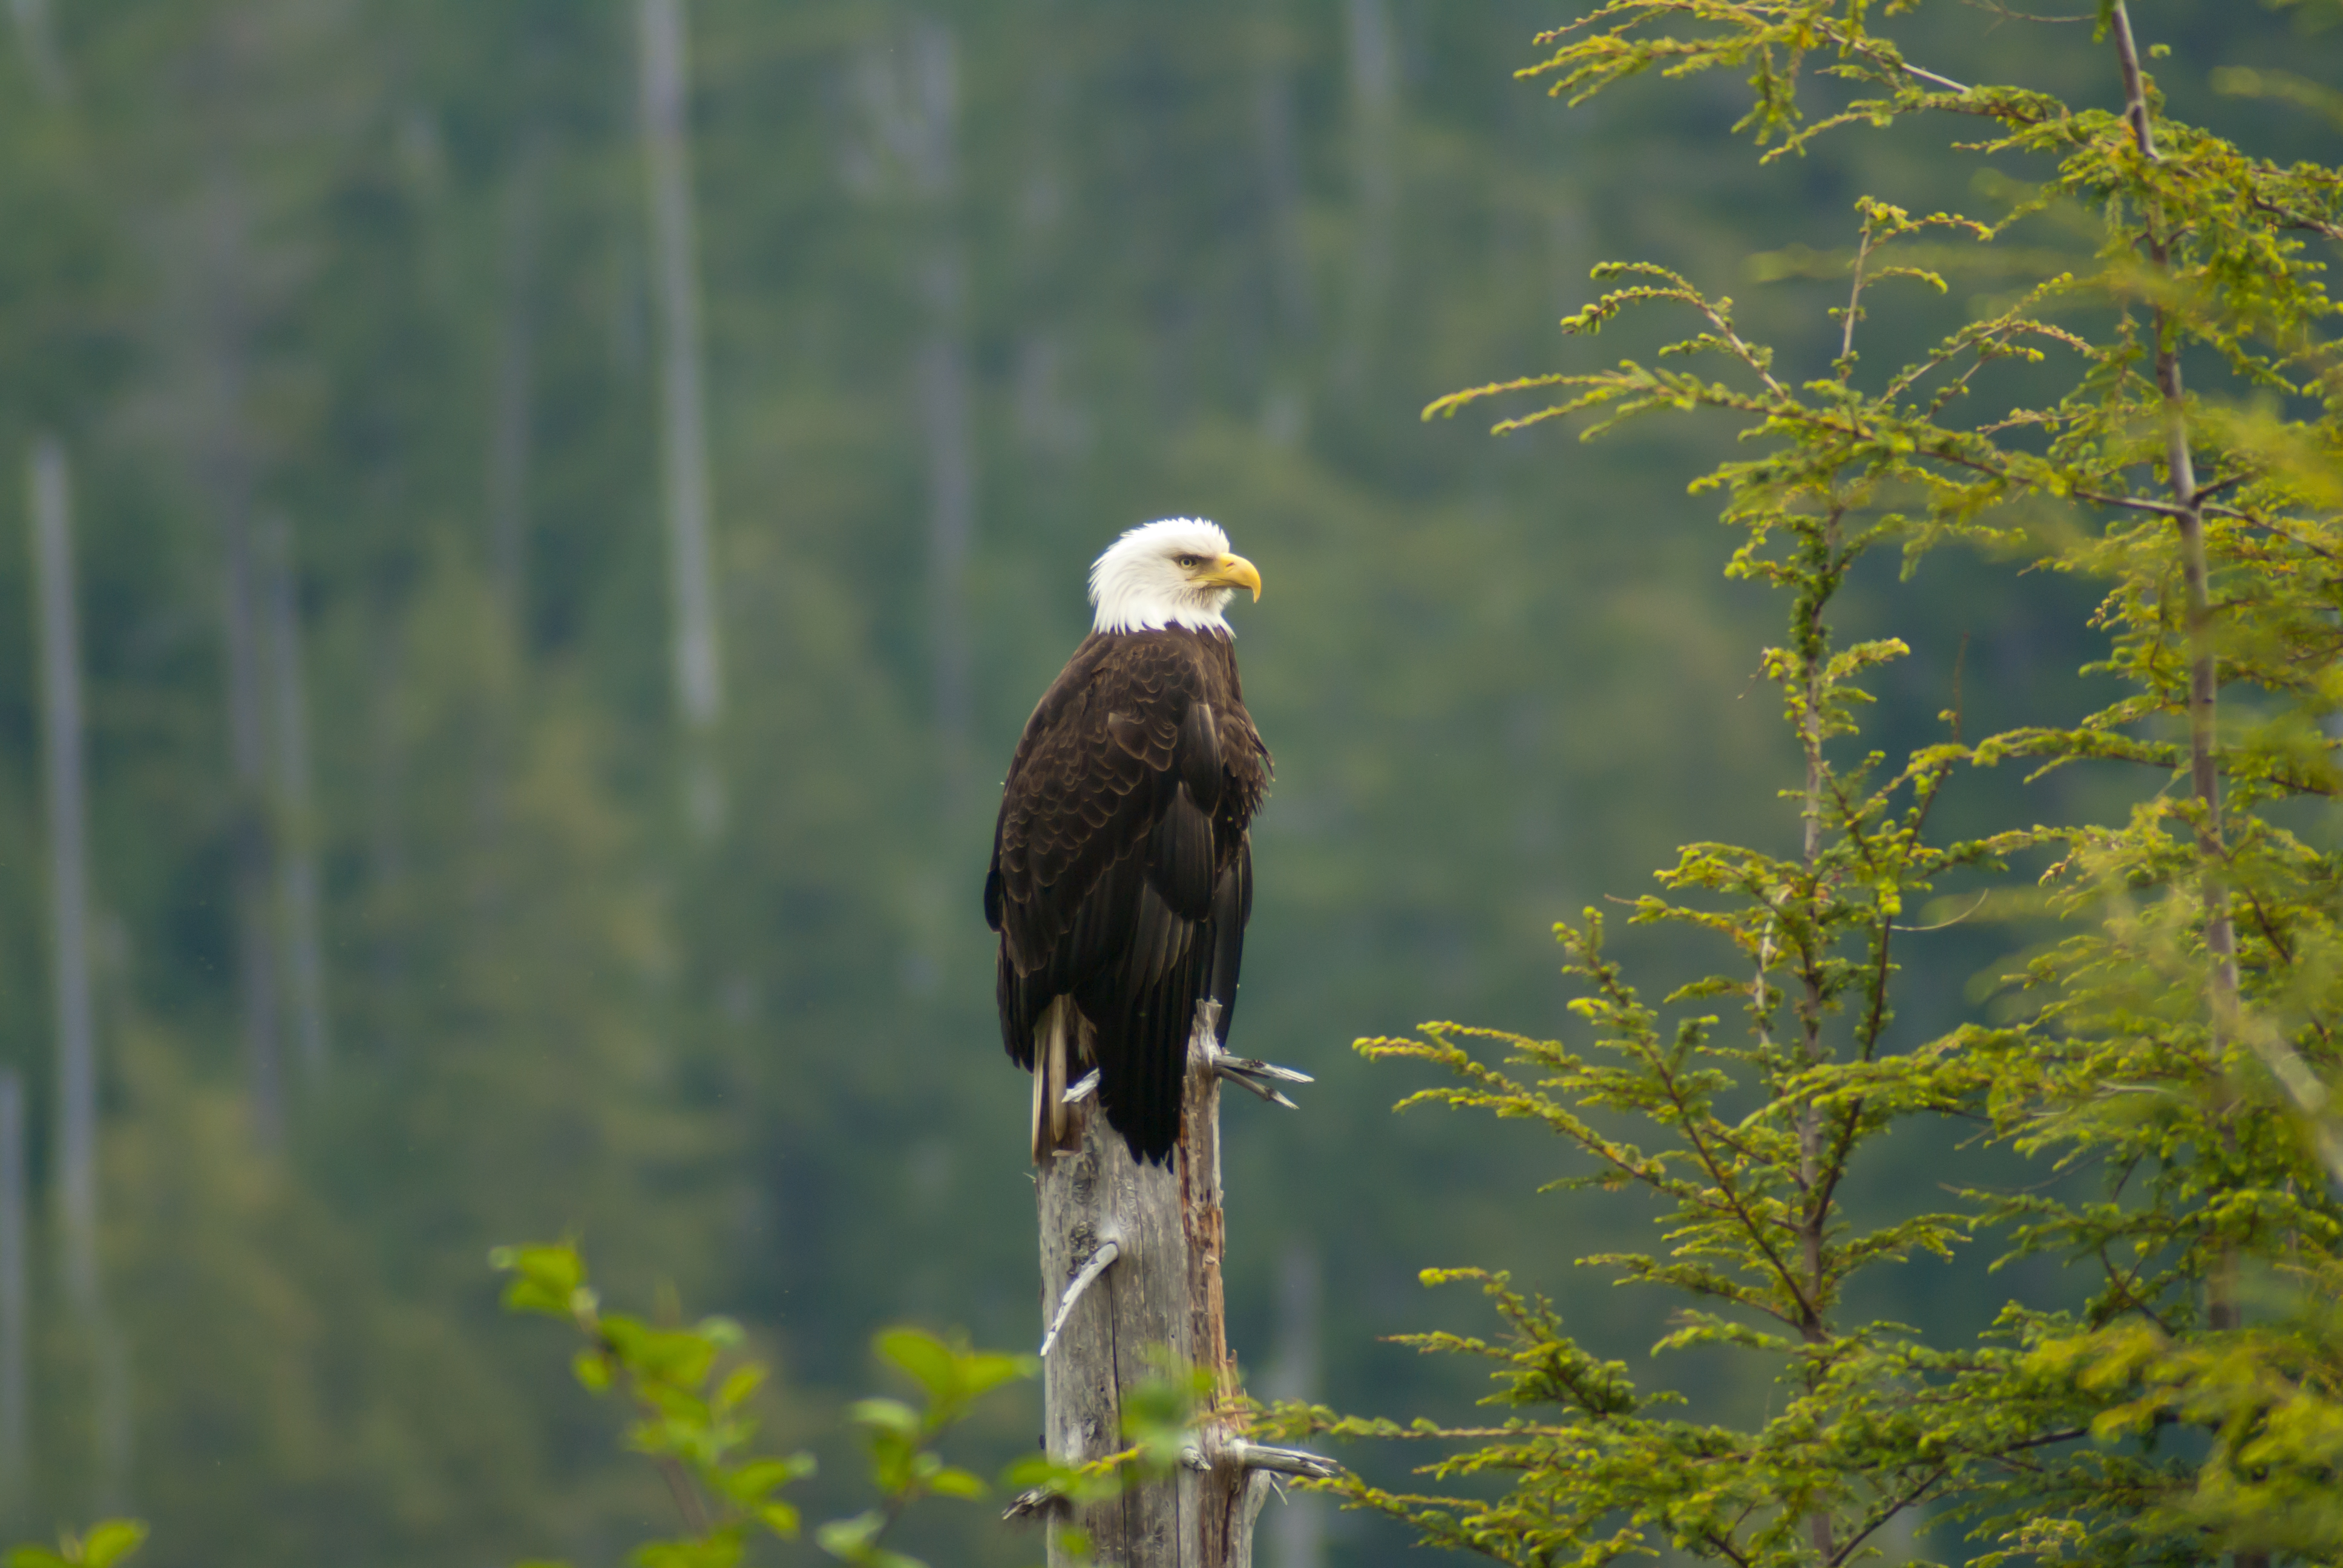 Bald eagle, animal saved by the Endangered Species Act